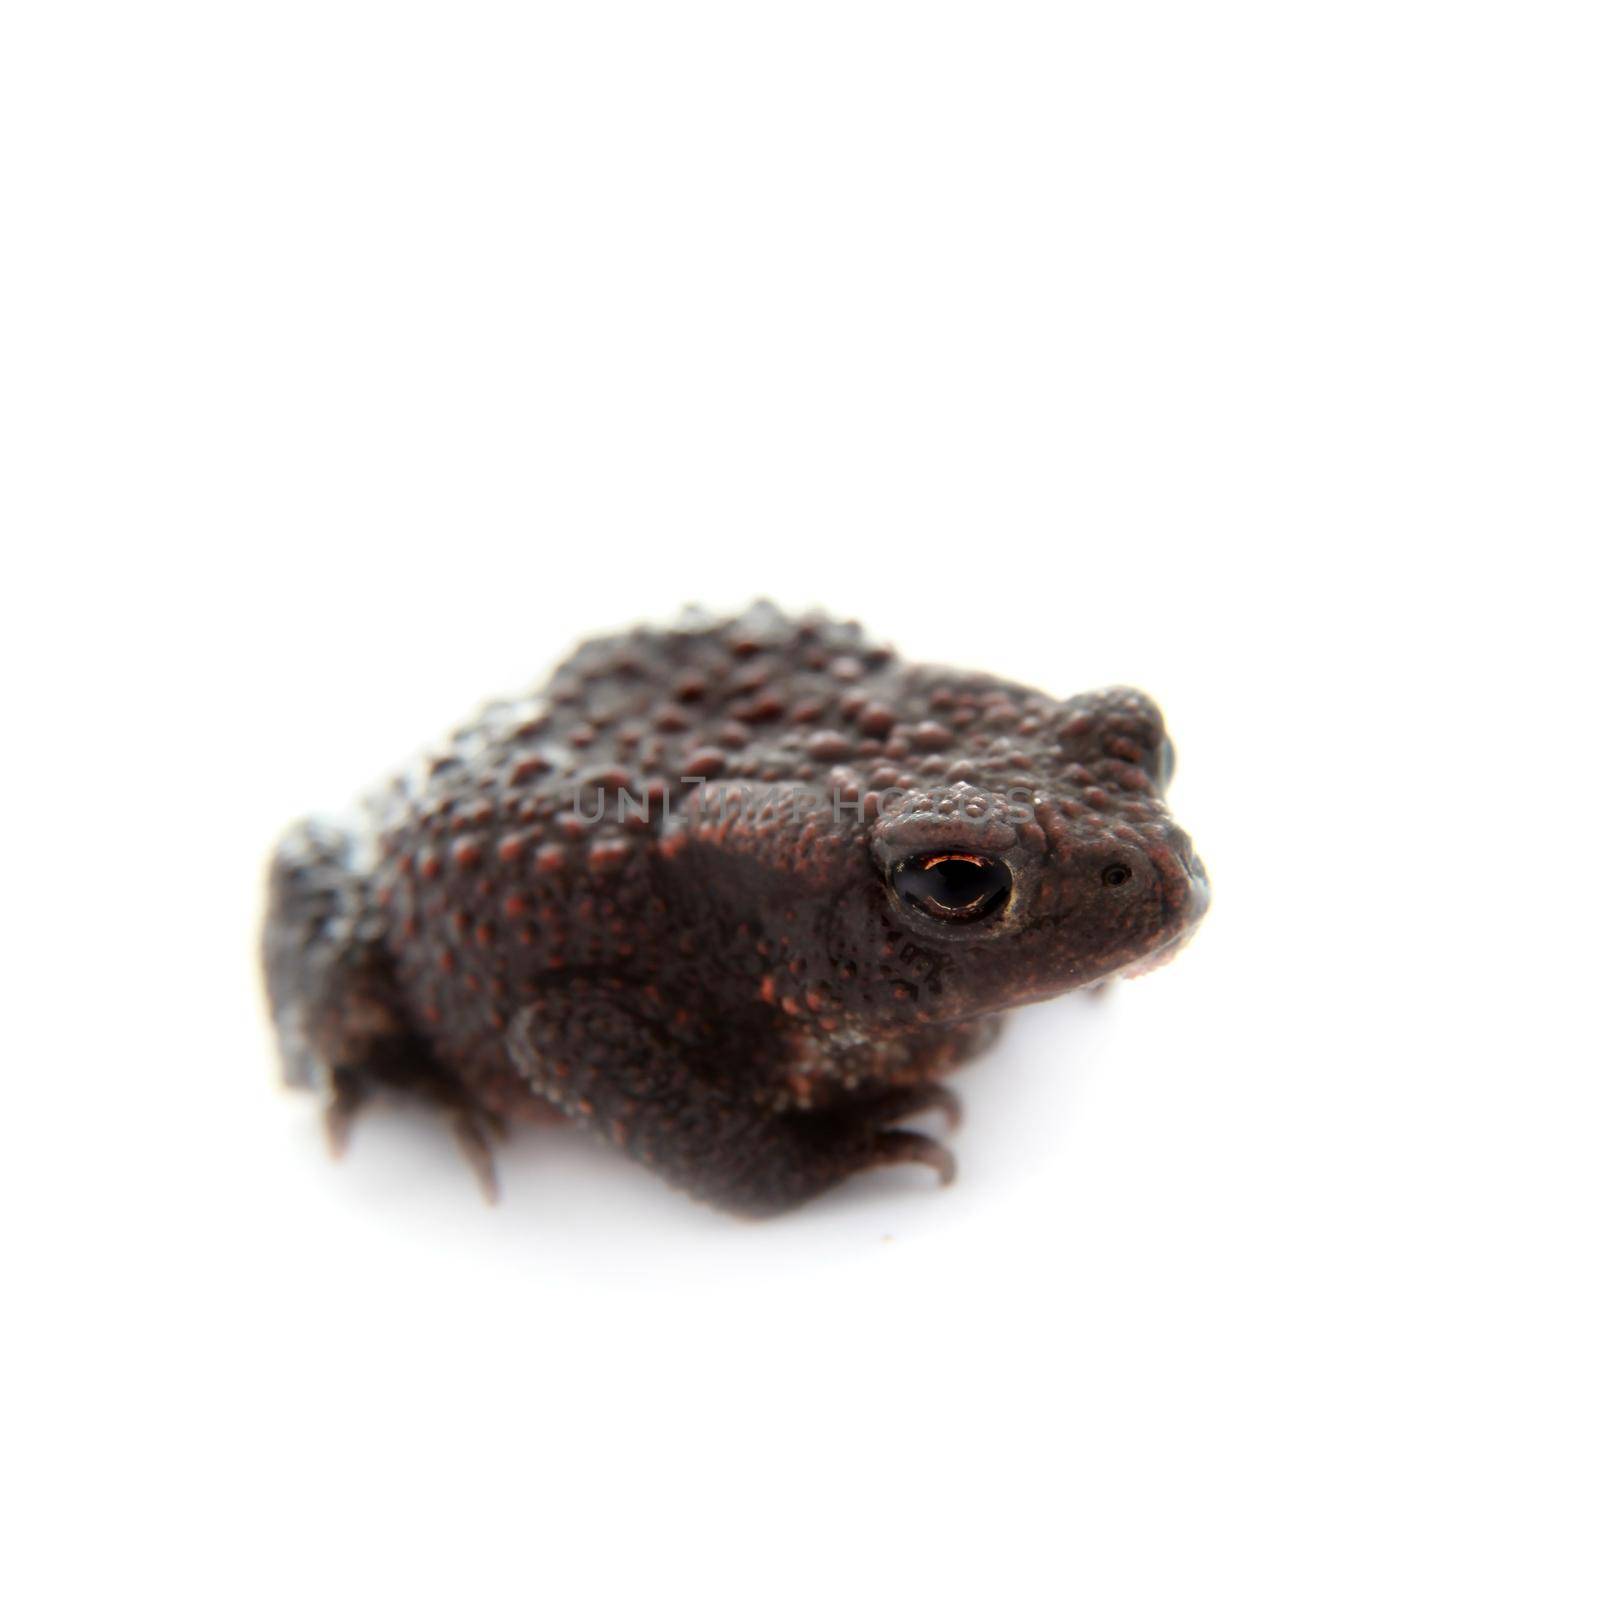 Common or European toad on white by RosaJay